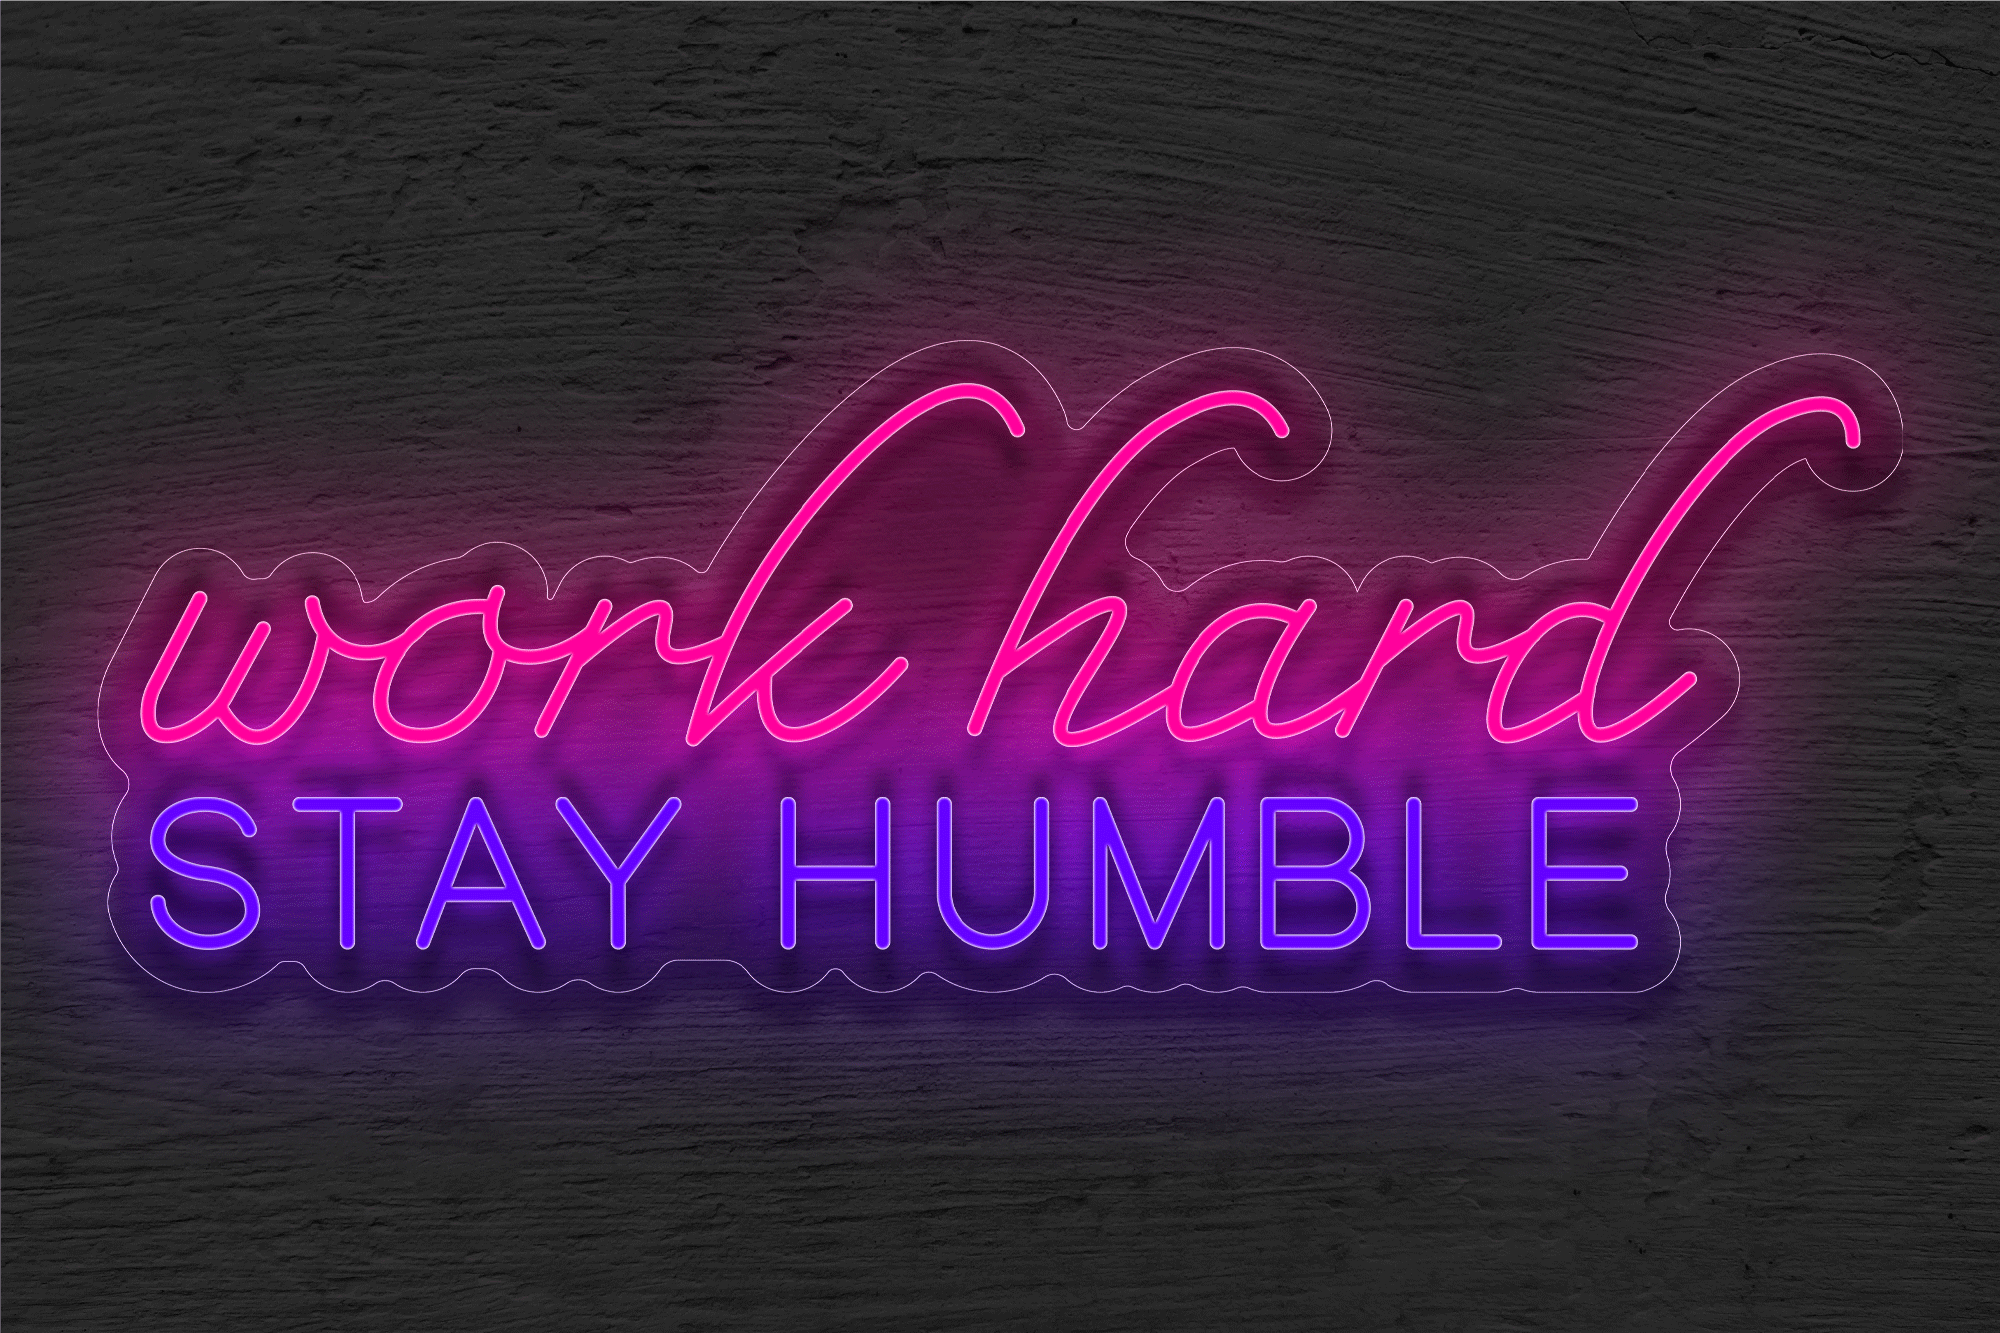 "work hard Stay Humble" LED Neon Sign